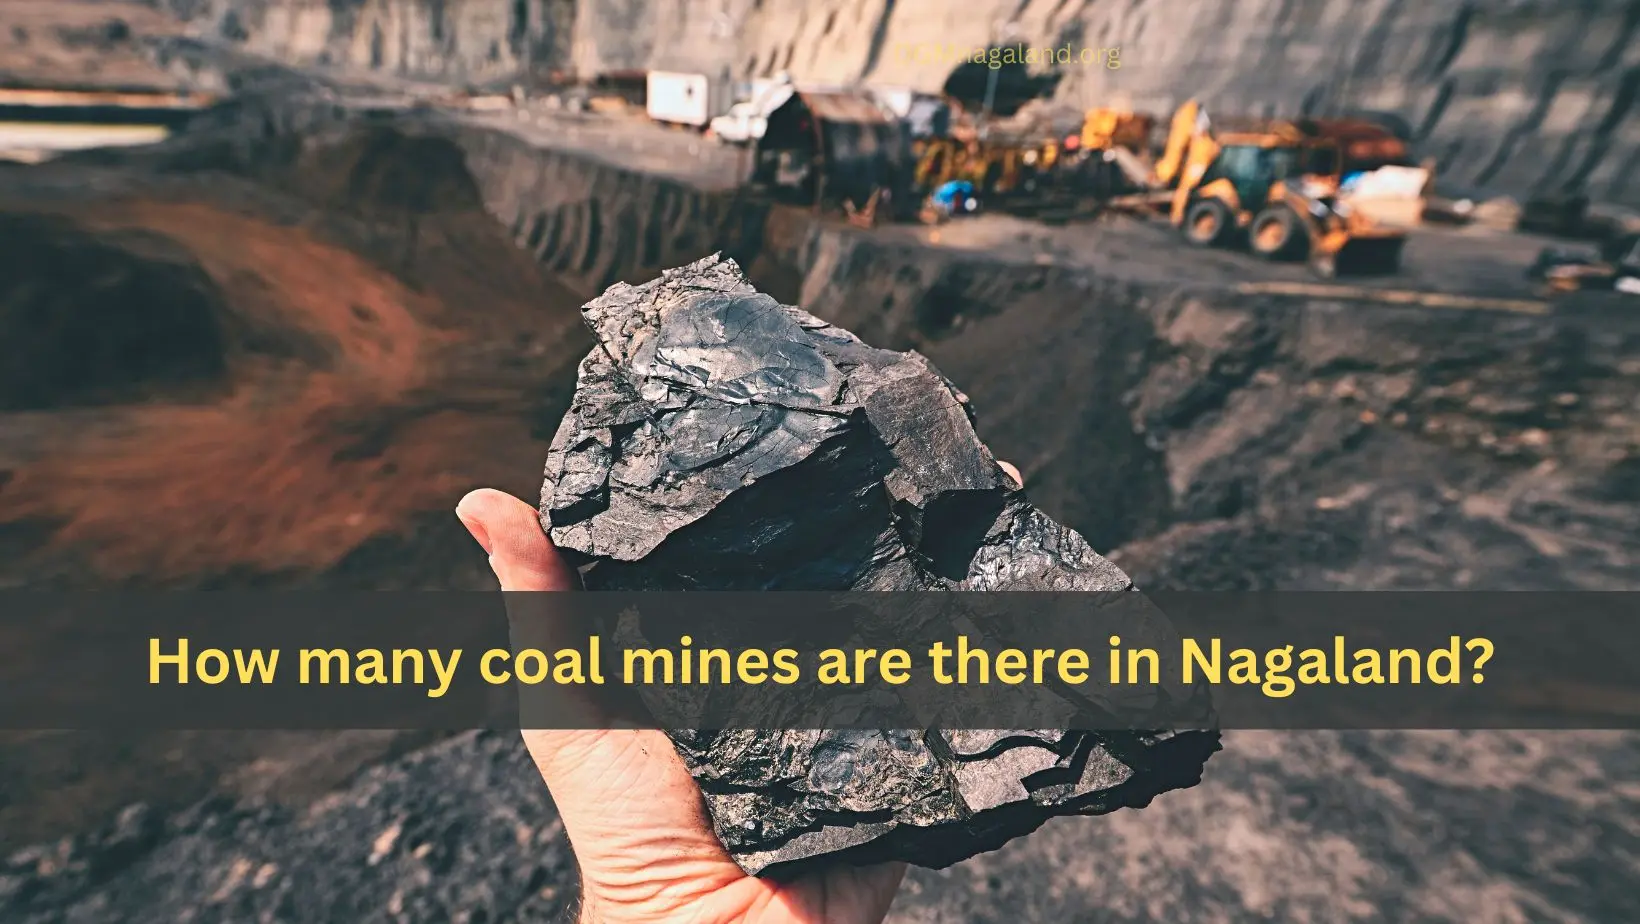 How many coal mines are there in Nagaland?